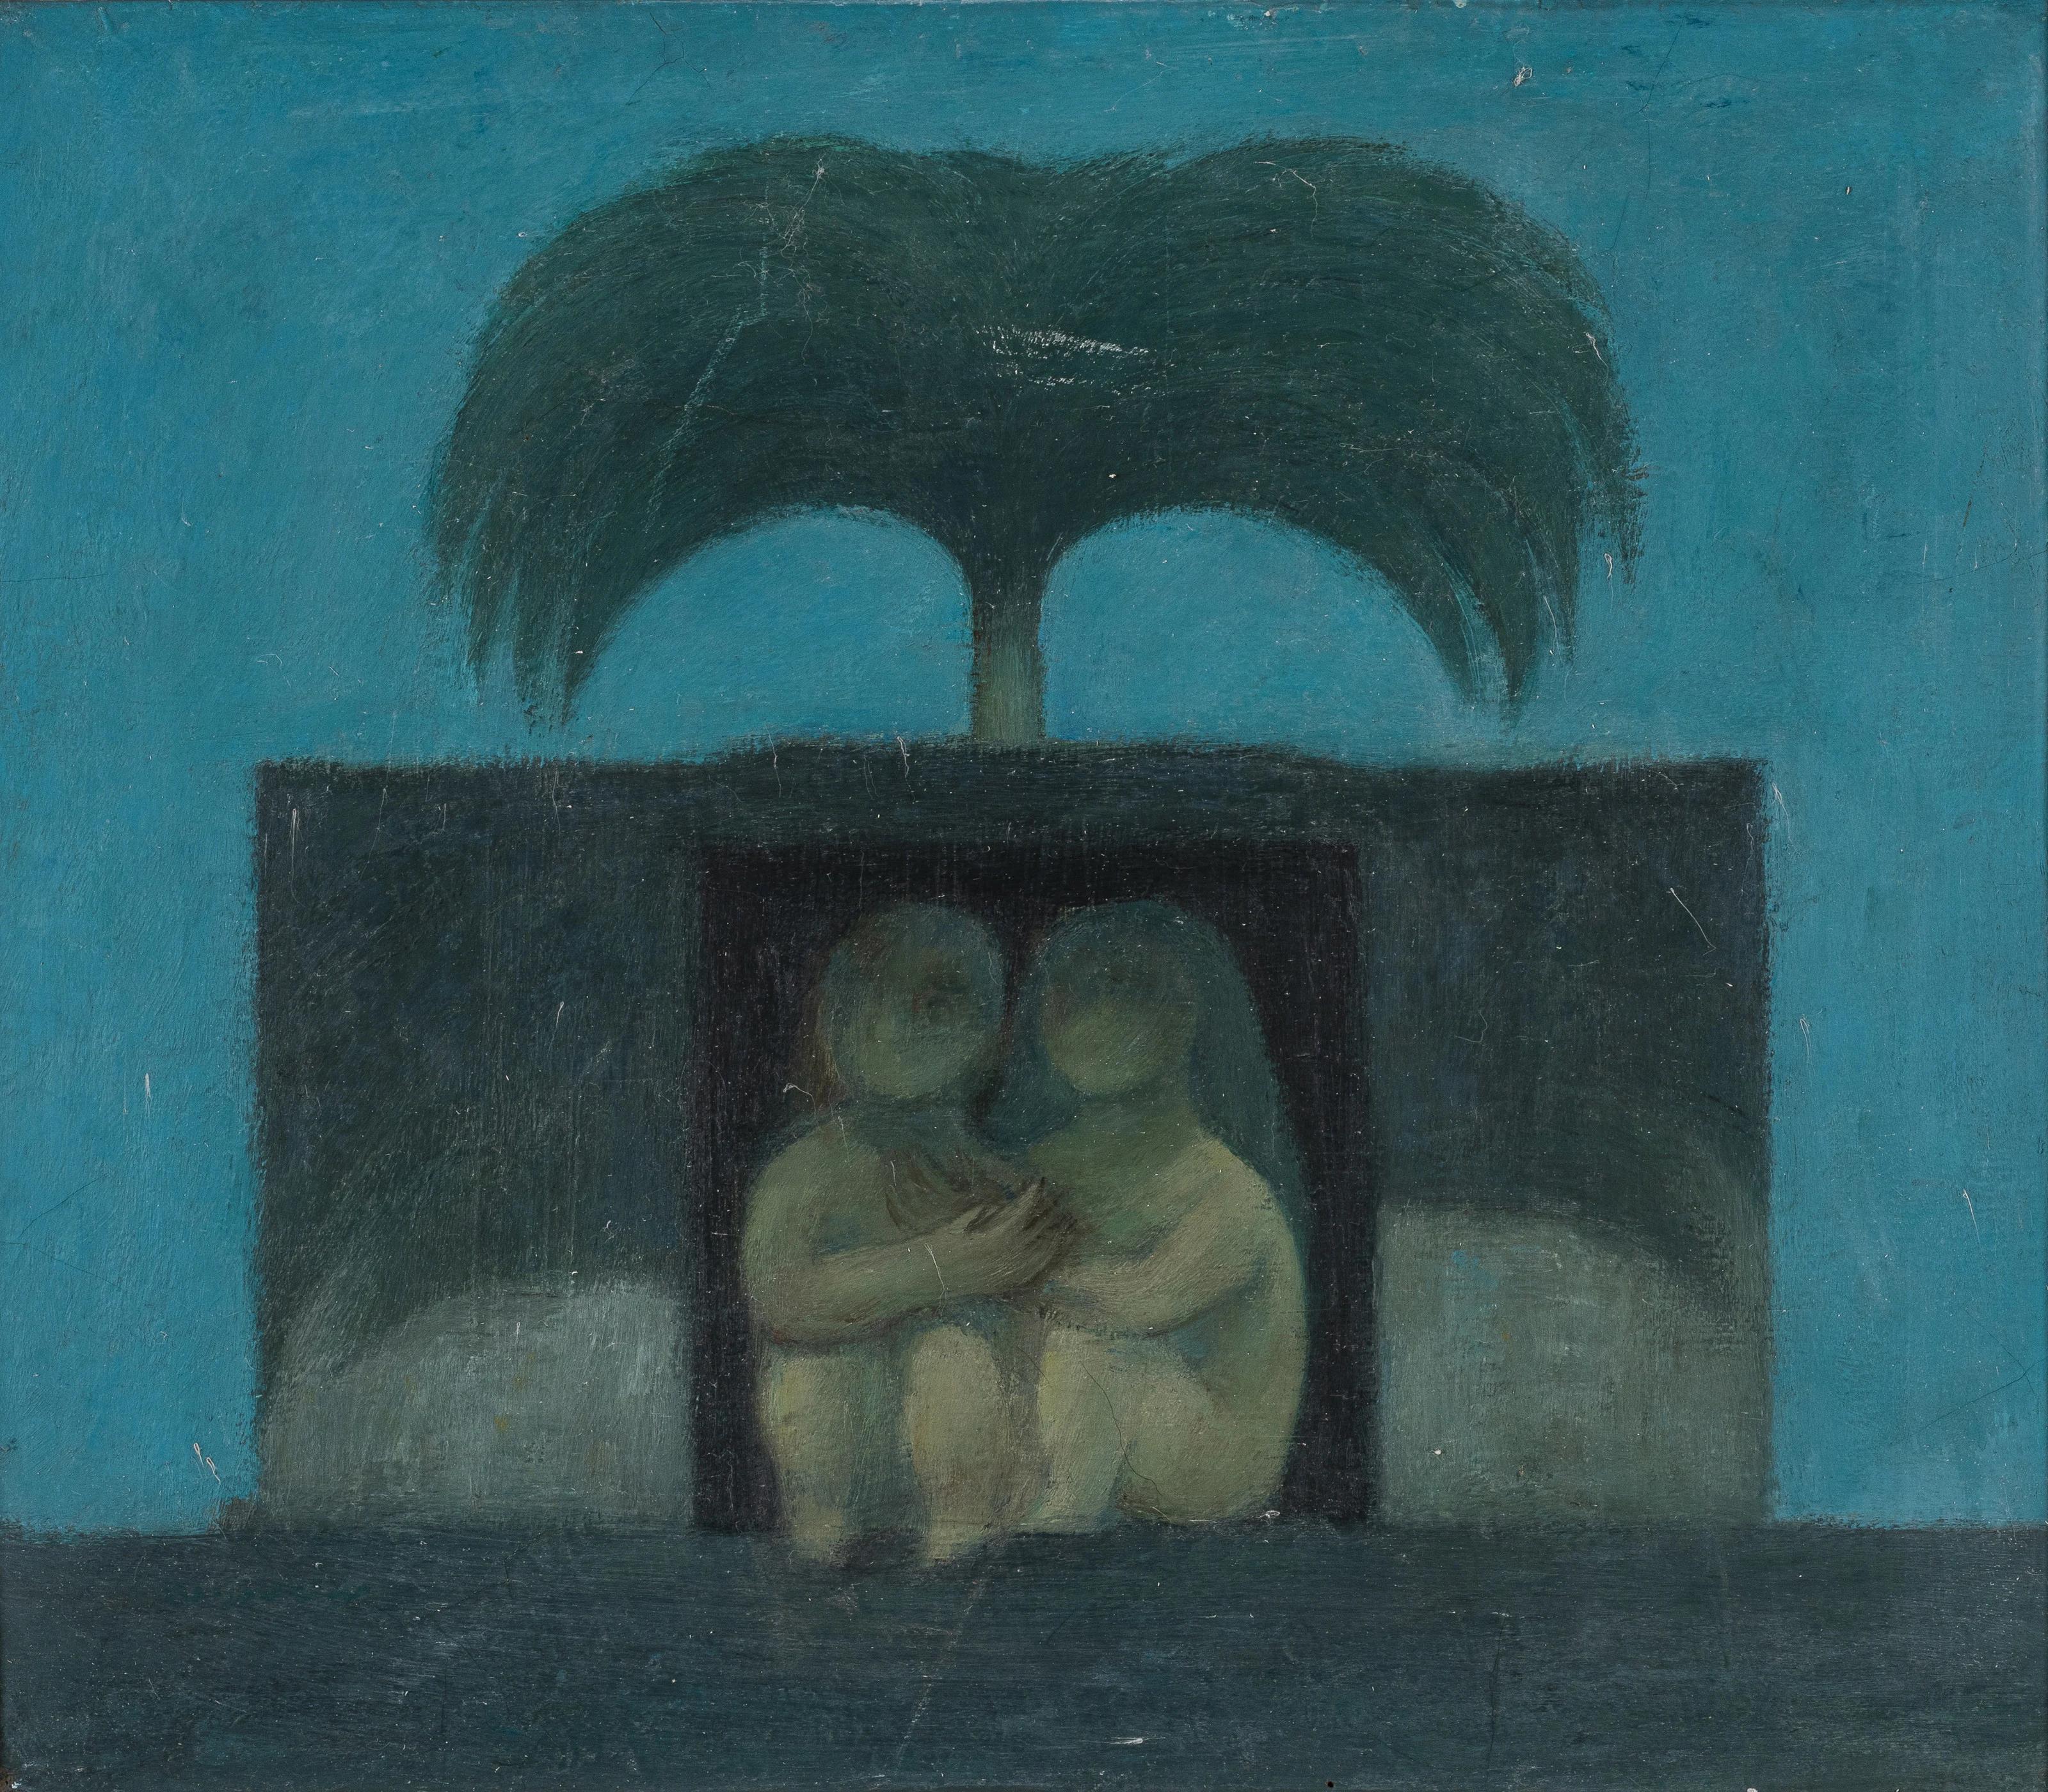 "Midnight Embrace" Painting 12" x 13" inch by SABRY MANSOUR

ABOUT: 

Sabry Mansour was born in Menoufia, in Egypt’s Nile Delta region in 1943. He earned his BA at the Faculty of Fine Arts, Helwan University in 1964 as a painter. He was a professor